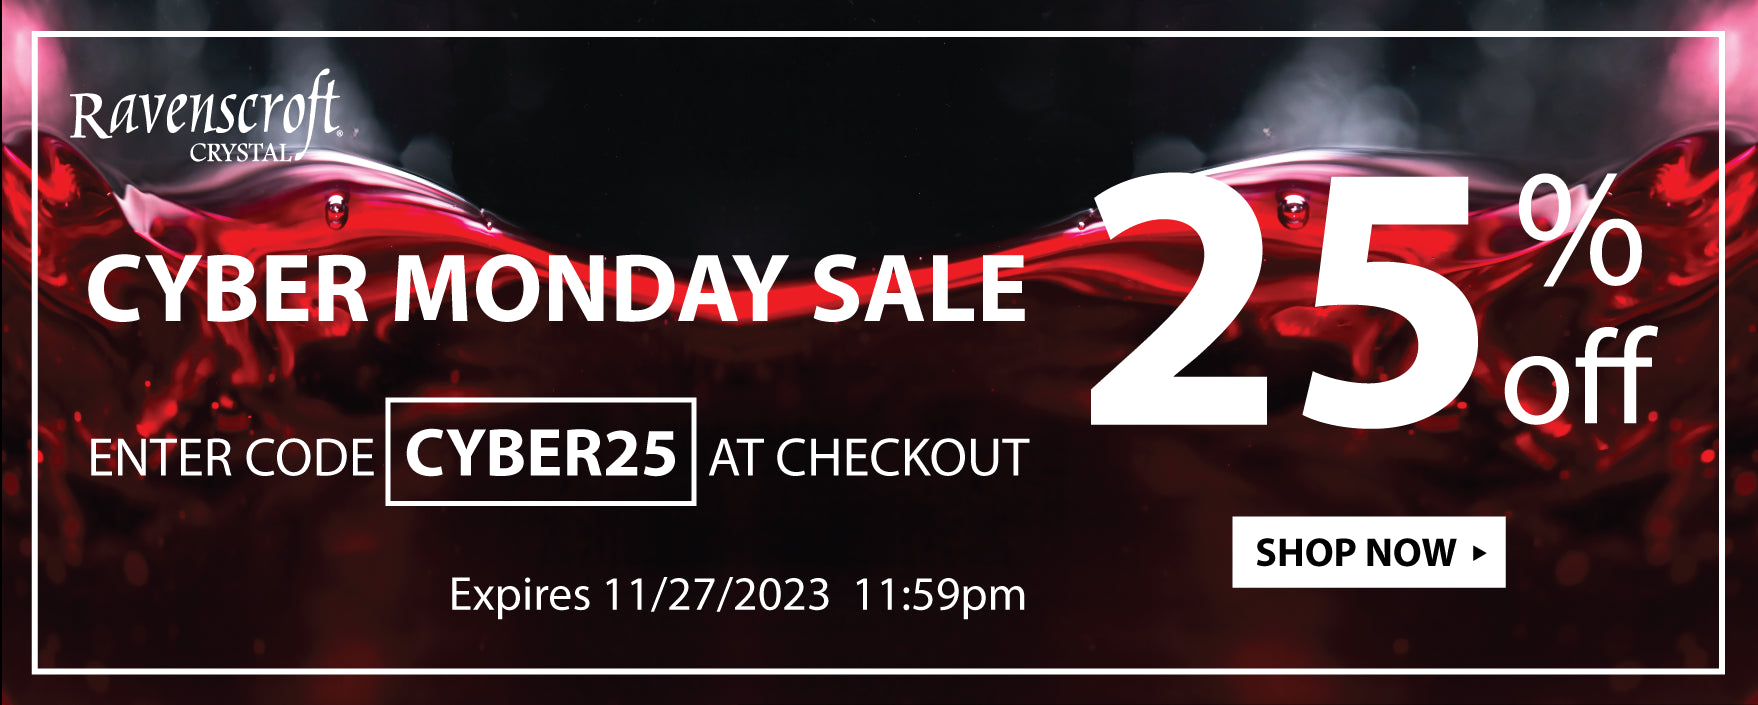 Take 25% OFF with code CYBER25